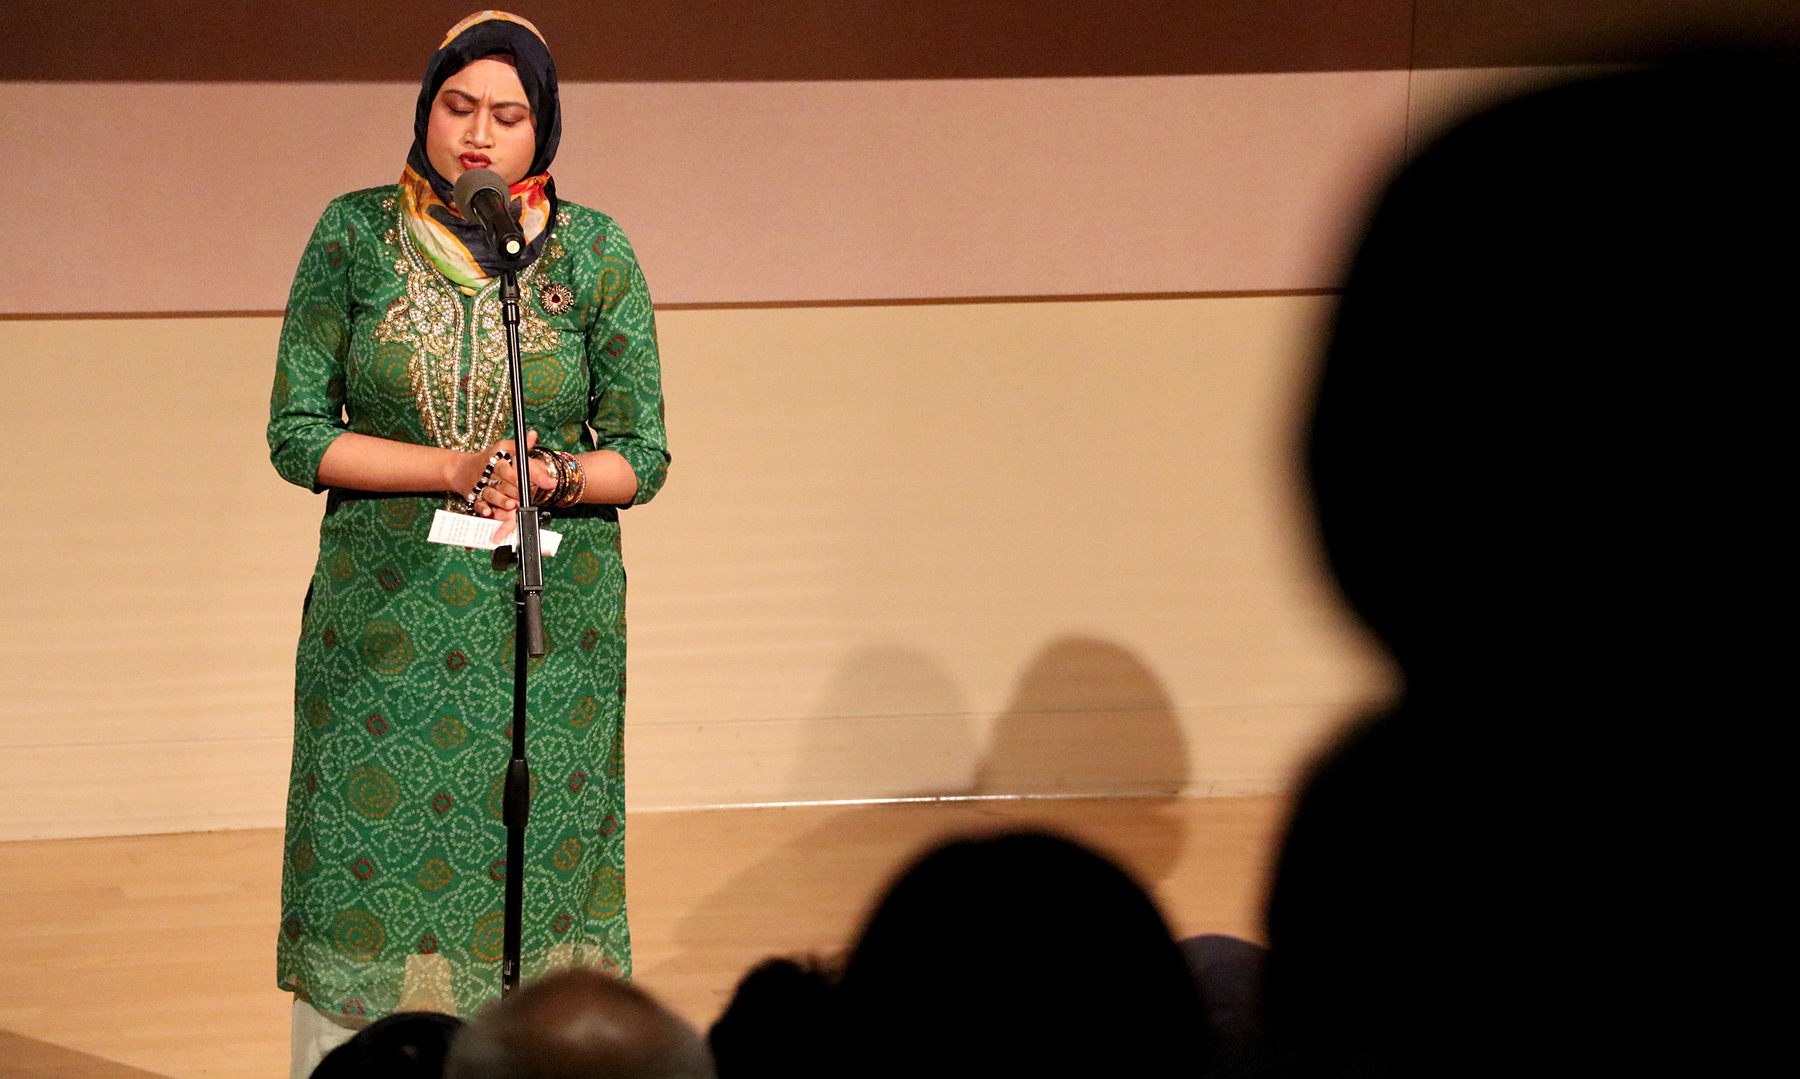 Shopto Rahman sings a Bengali folk song during the Global Talent Show on Oct. 12 inside the Spurlock Museum.  Rahman has received various national awards in Bangladesh for her singing, and on Wednesday night she added another award to her trophy case after placing second at the talent show.